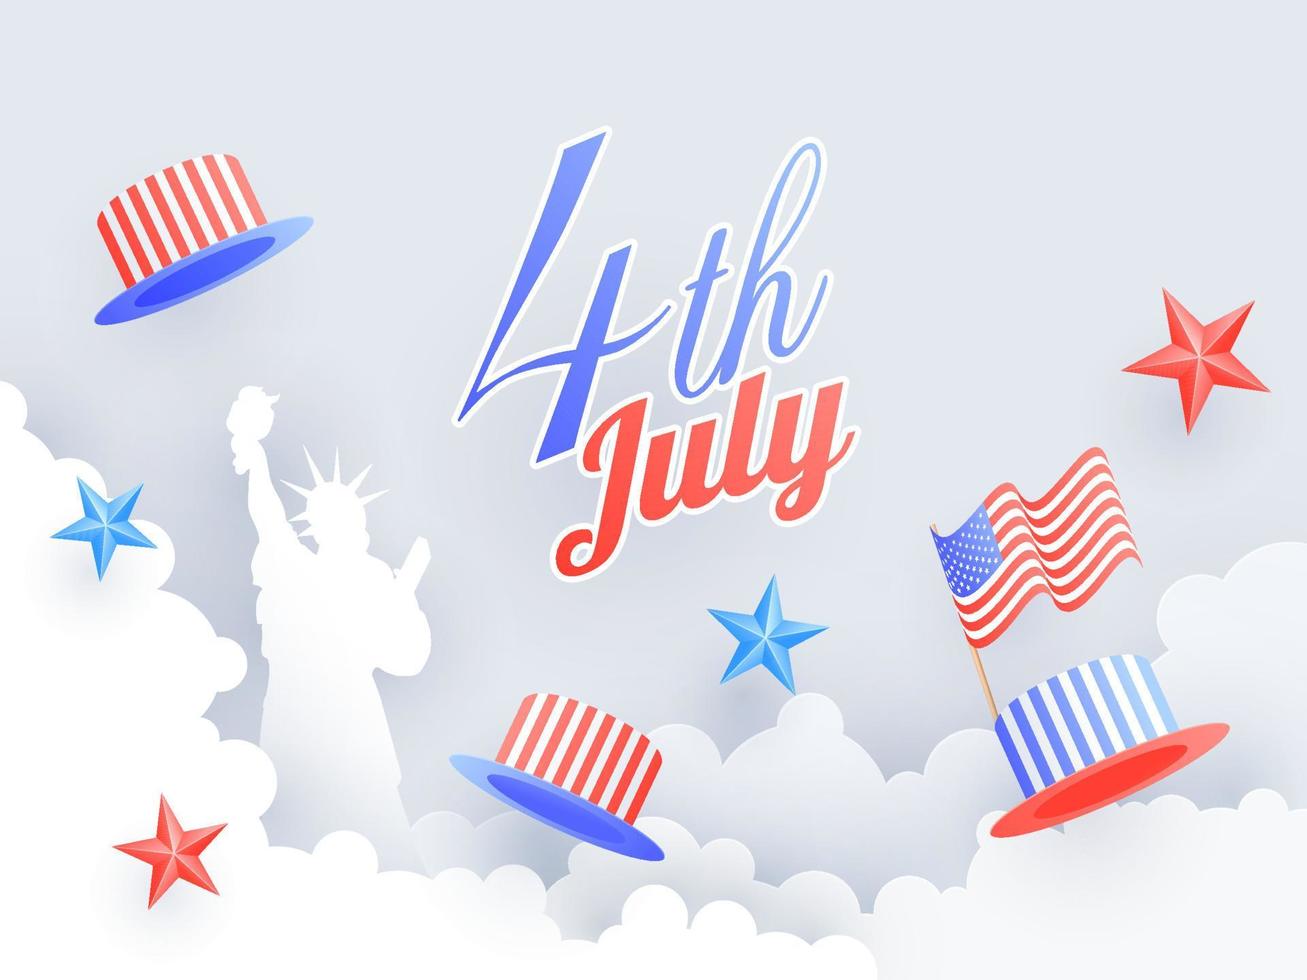 4th of July celebration poster or banner design decorated with Statue of liberty, uncle sam hat and colorful stars on paper cut cloudy background. vector